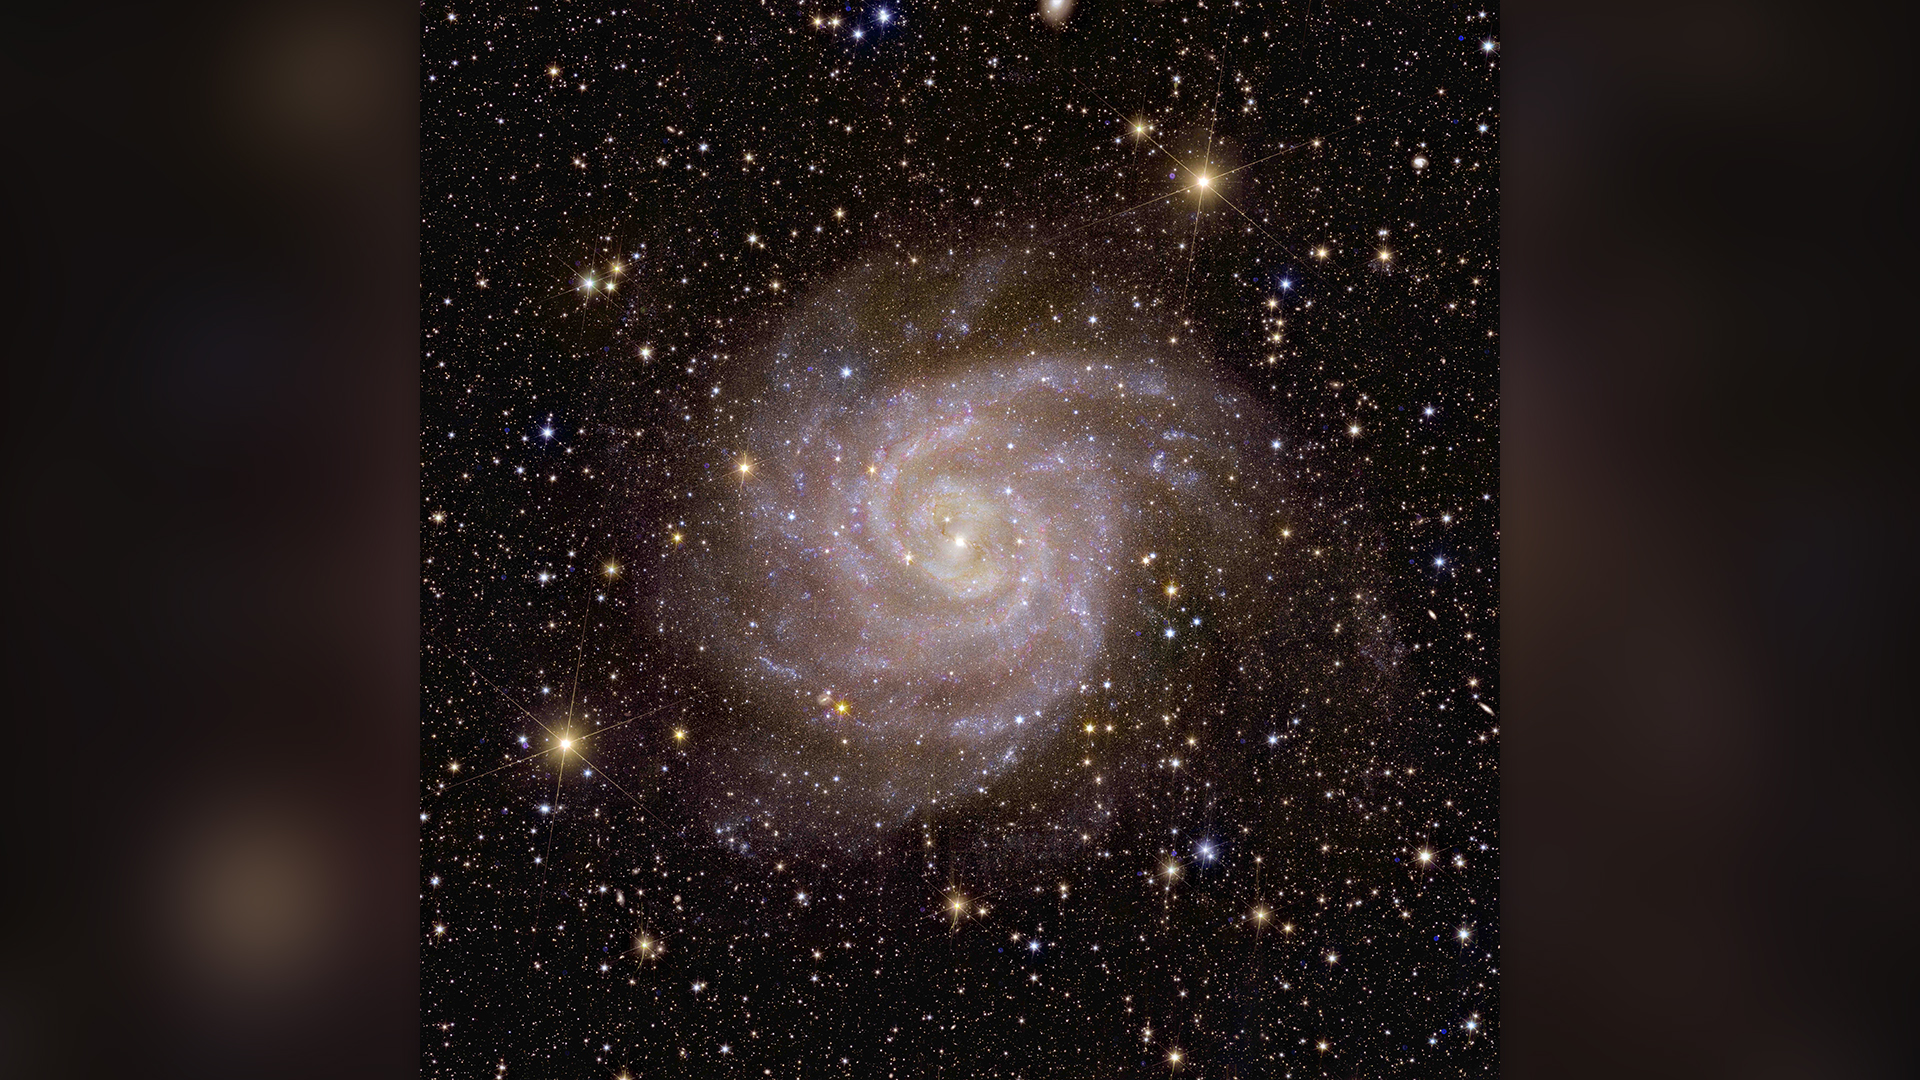 Euclid's view of spiral galaxy IC 342.